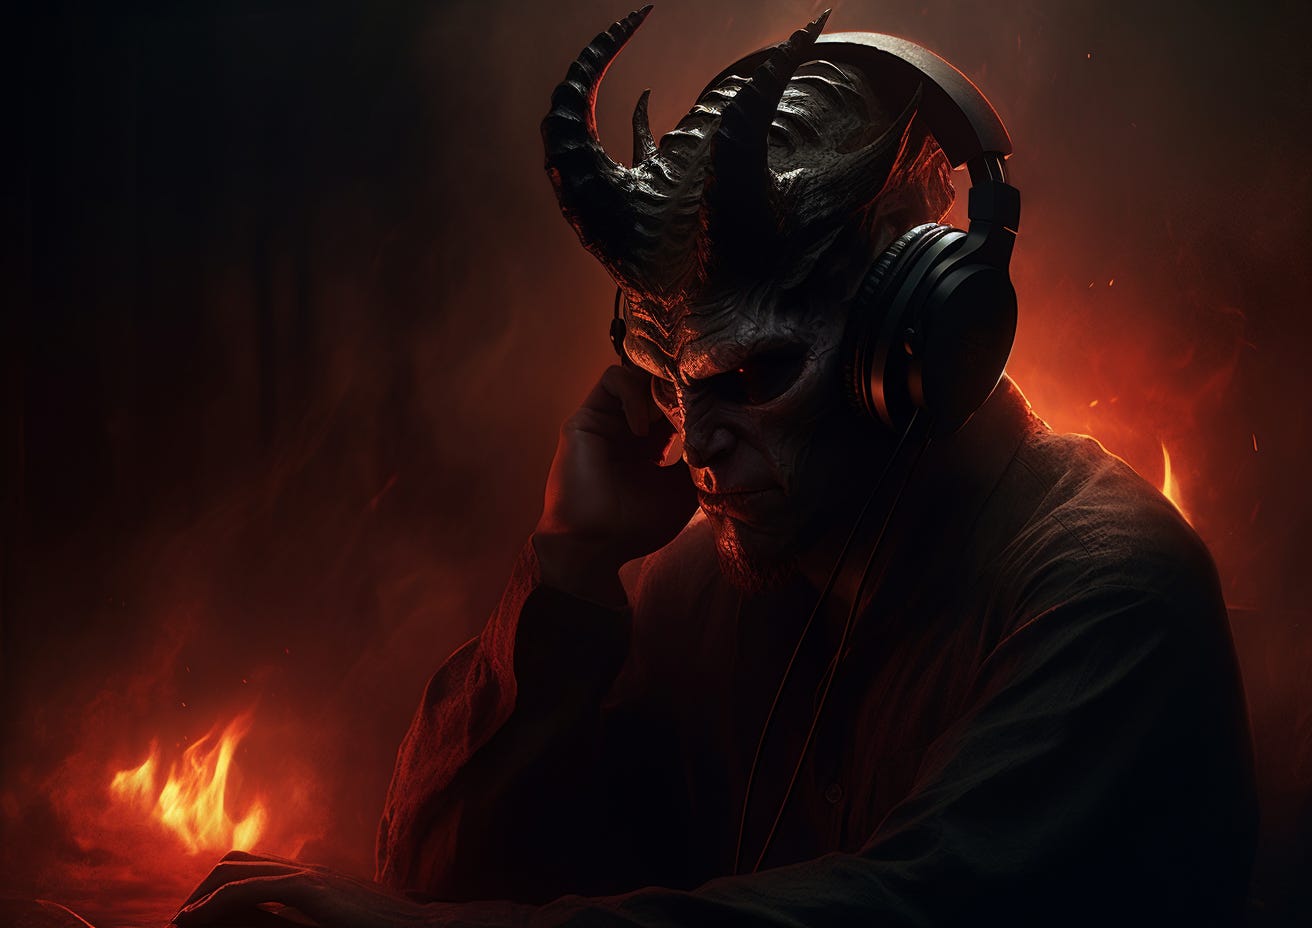 A demon listening to headphones in hell, his left hand raised so his fingers are pressed on the left headphone covering his ear.